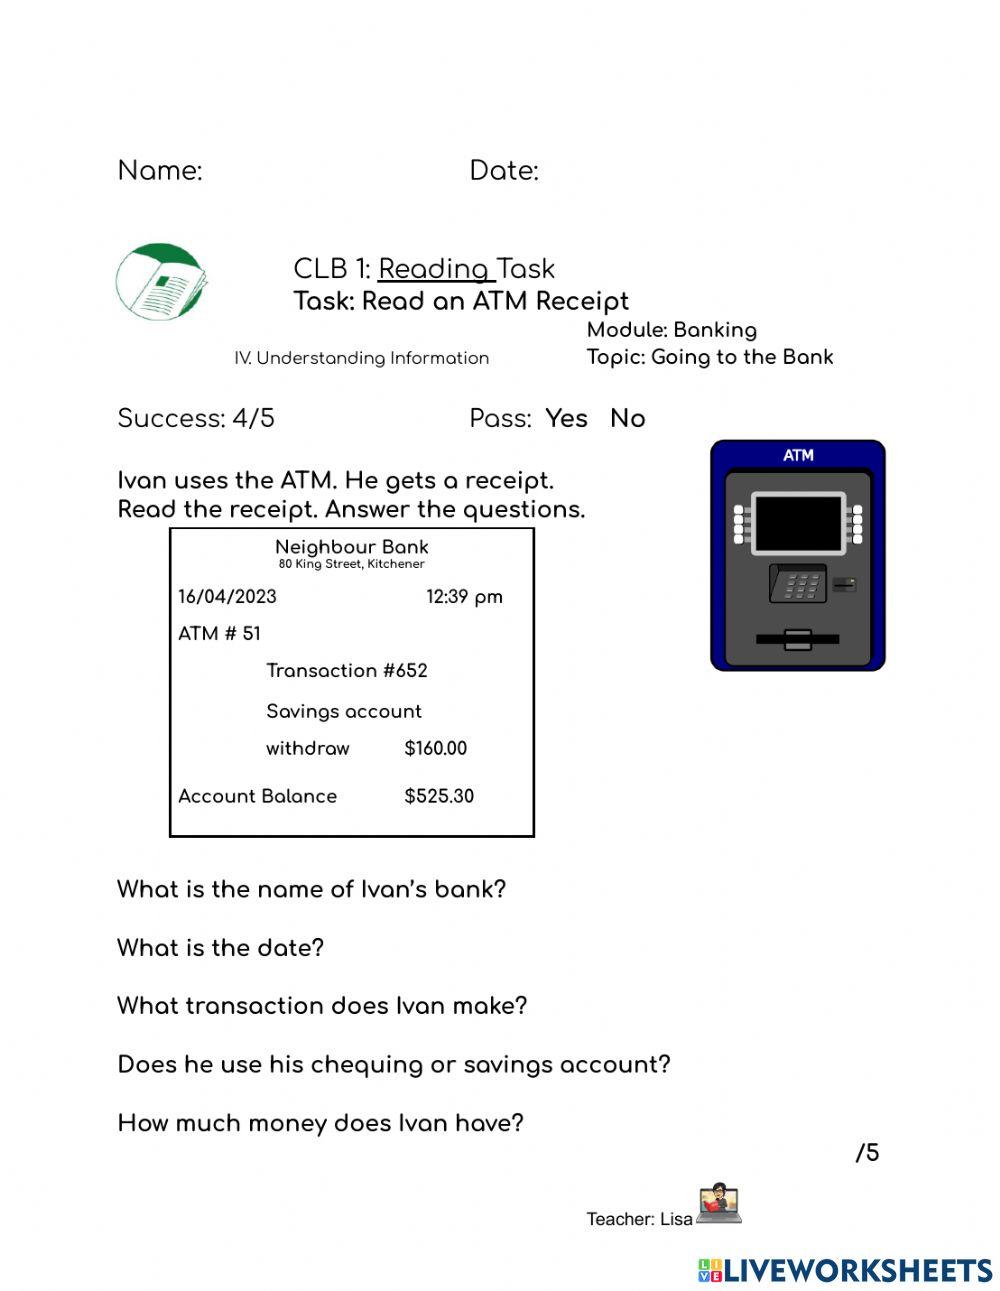 CLB1: At the Bank ATM Receipt TASK